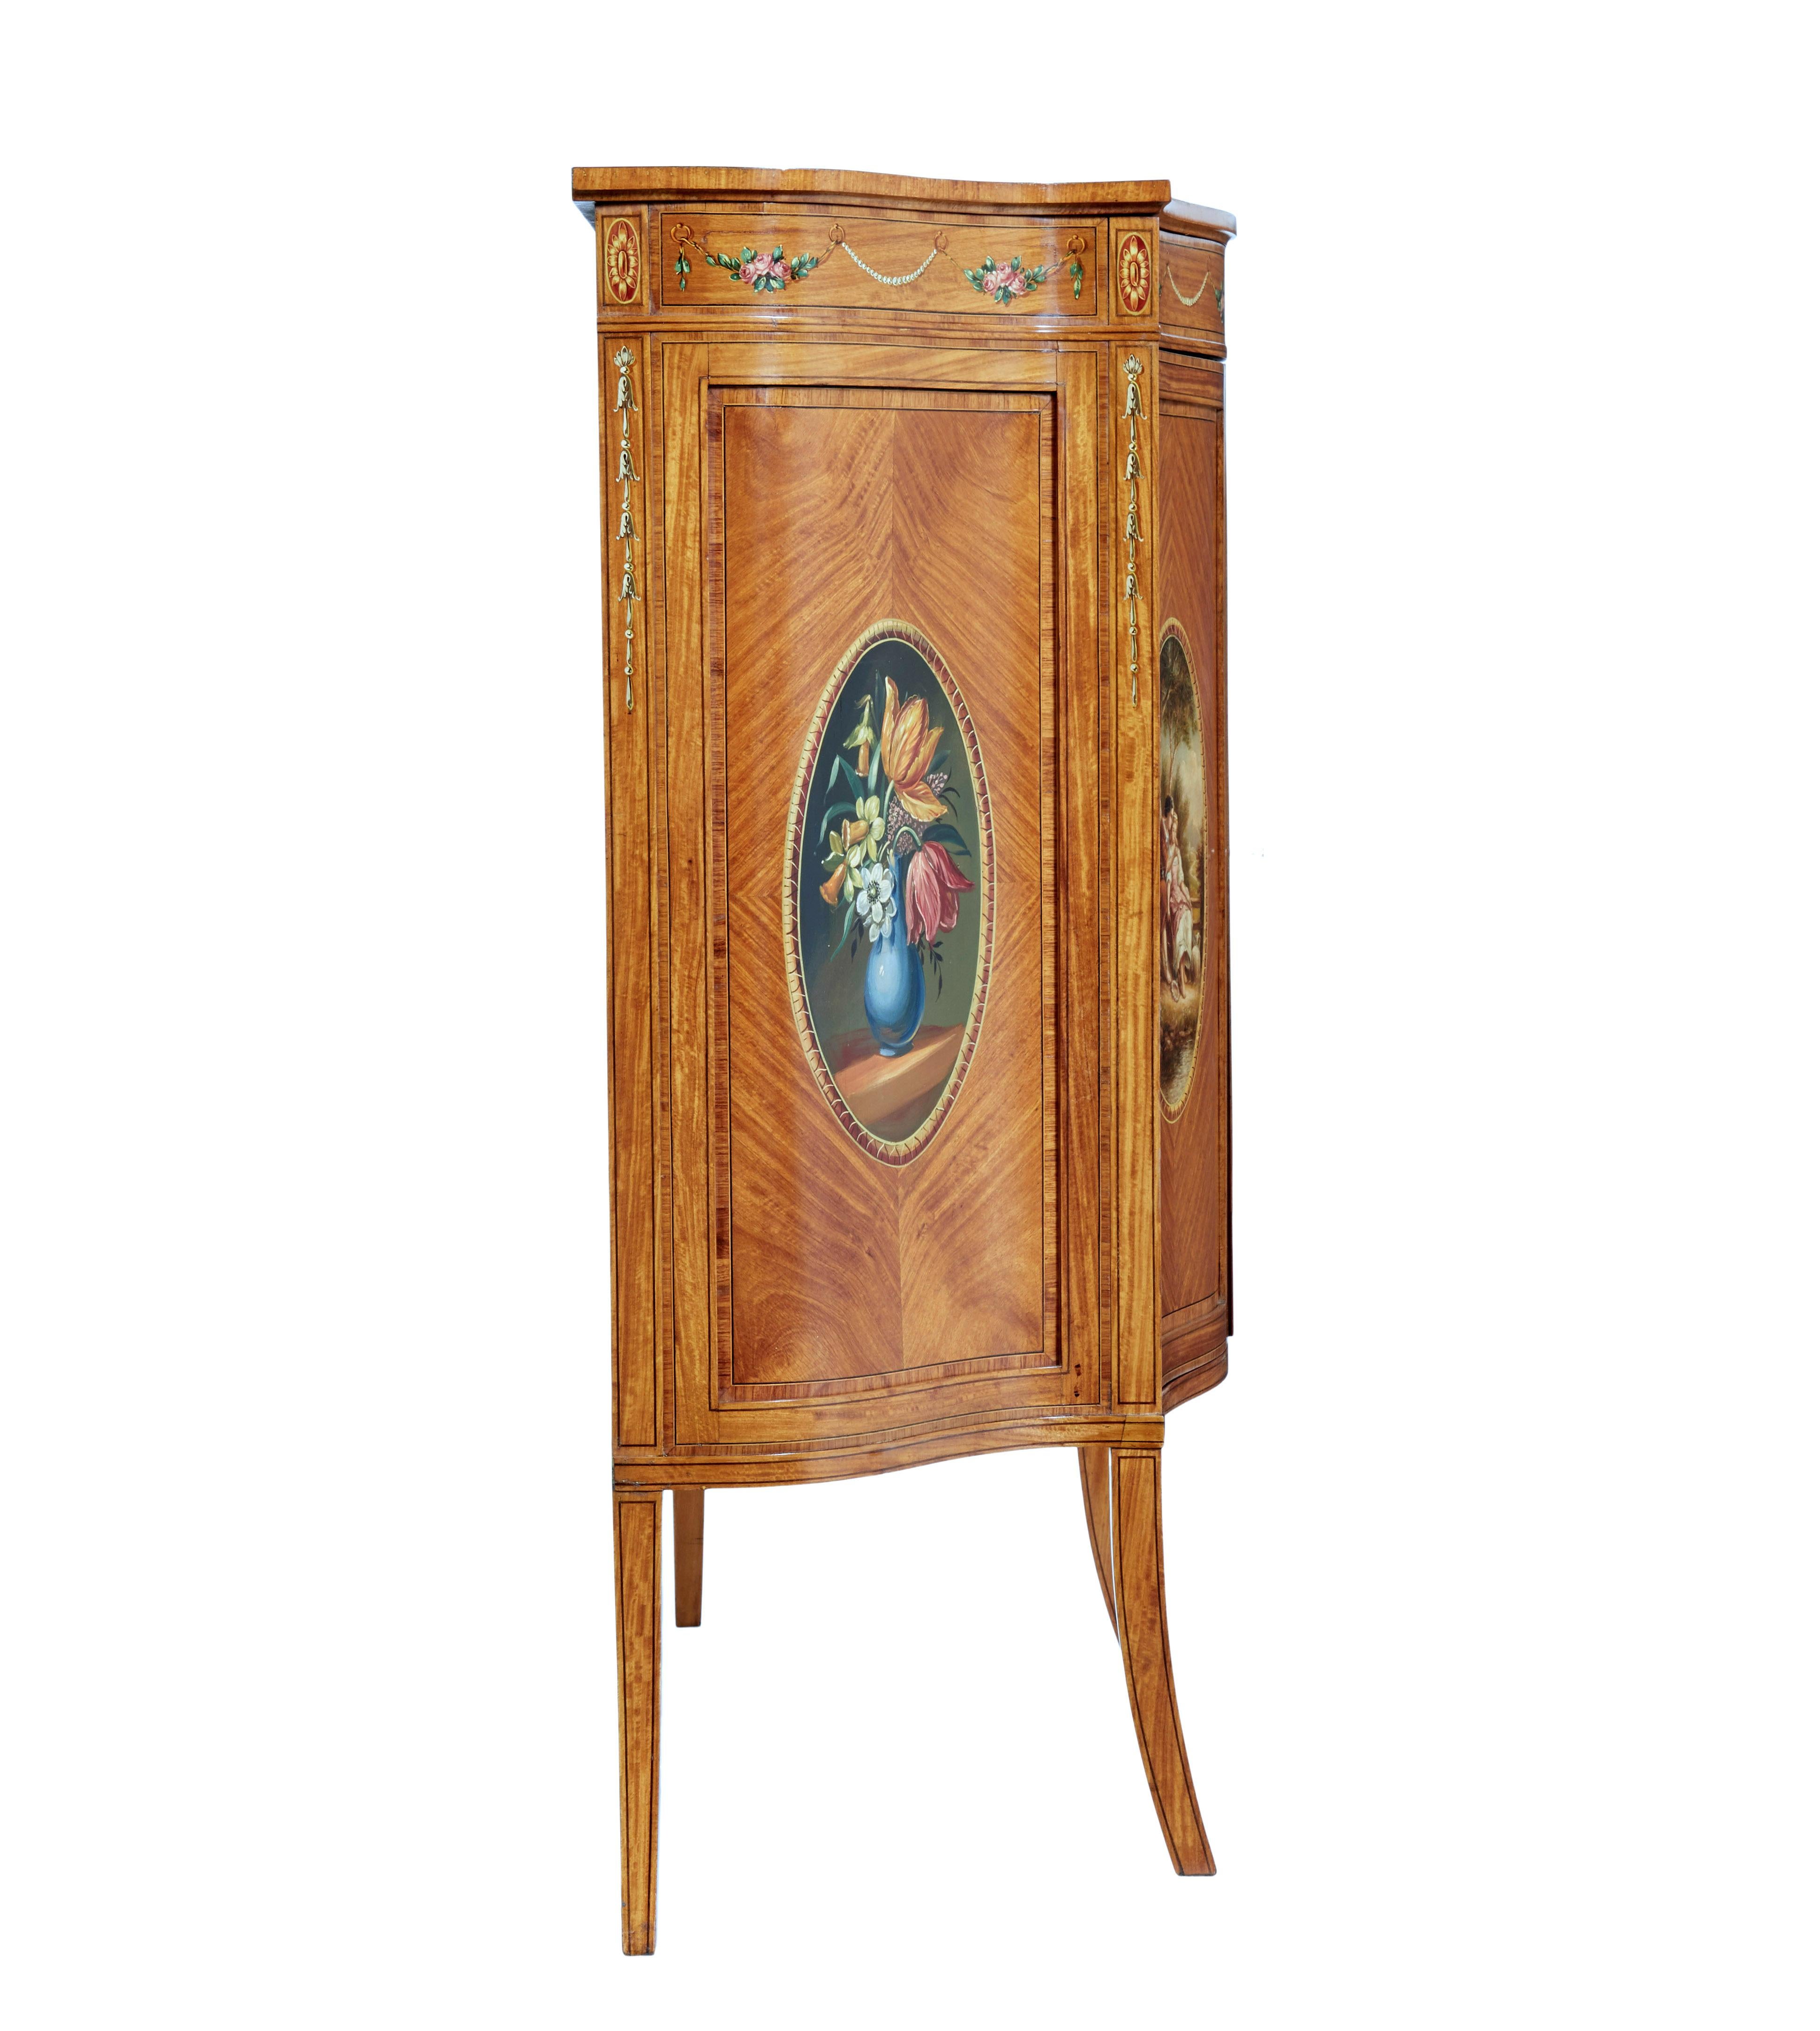 English 19th century sheraton revival satinwood inlaid and painted cabinet For Sale